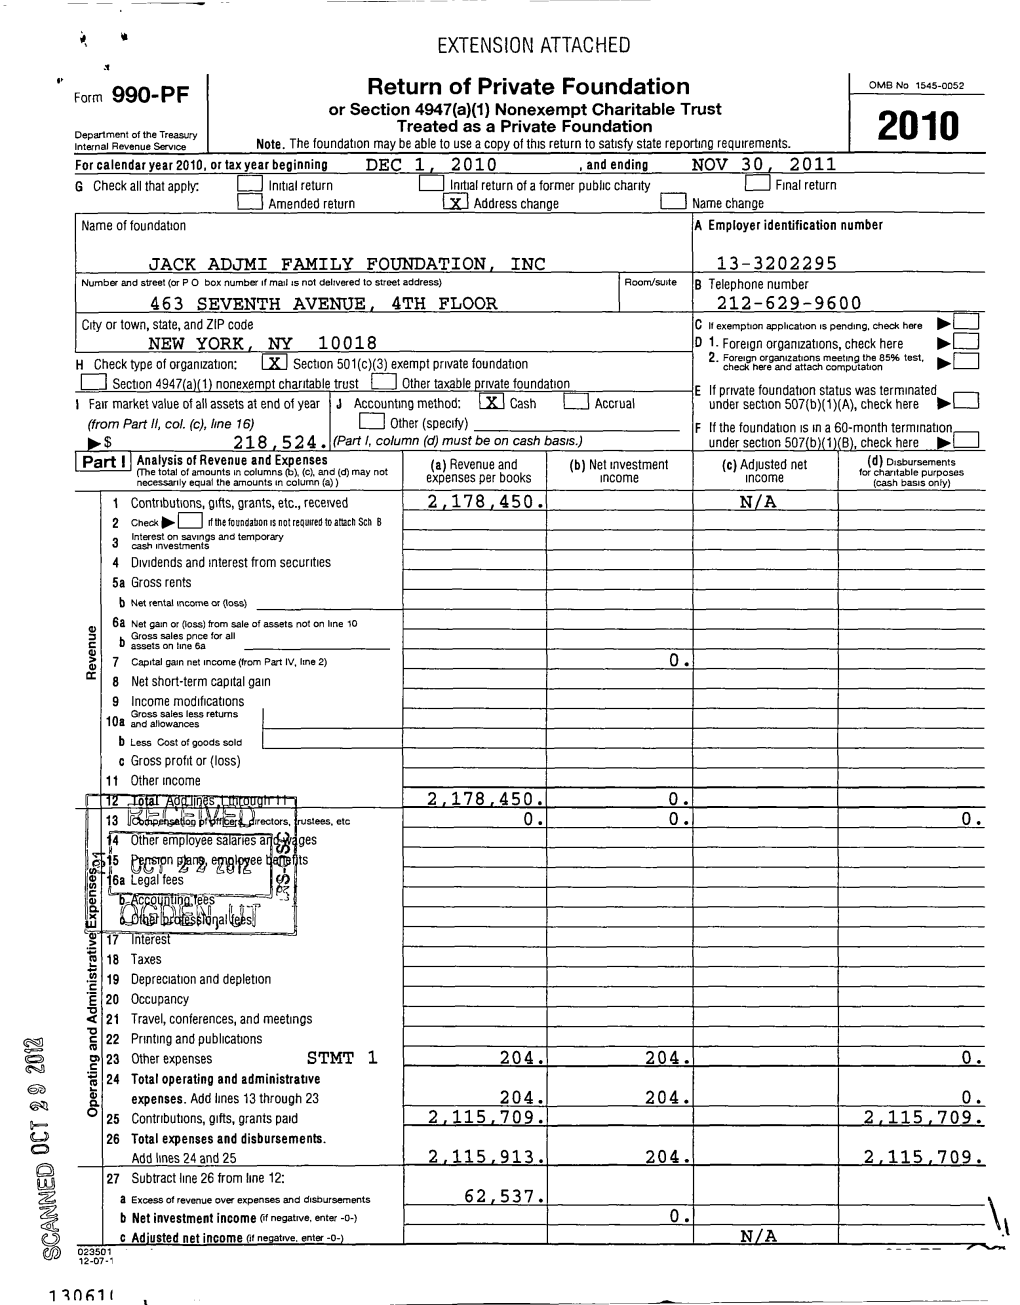 Form 990-PF Return of Private Foundation